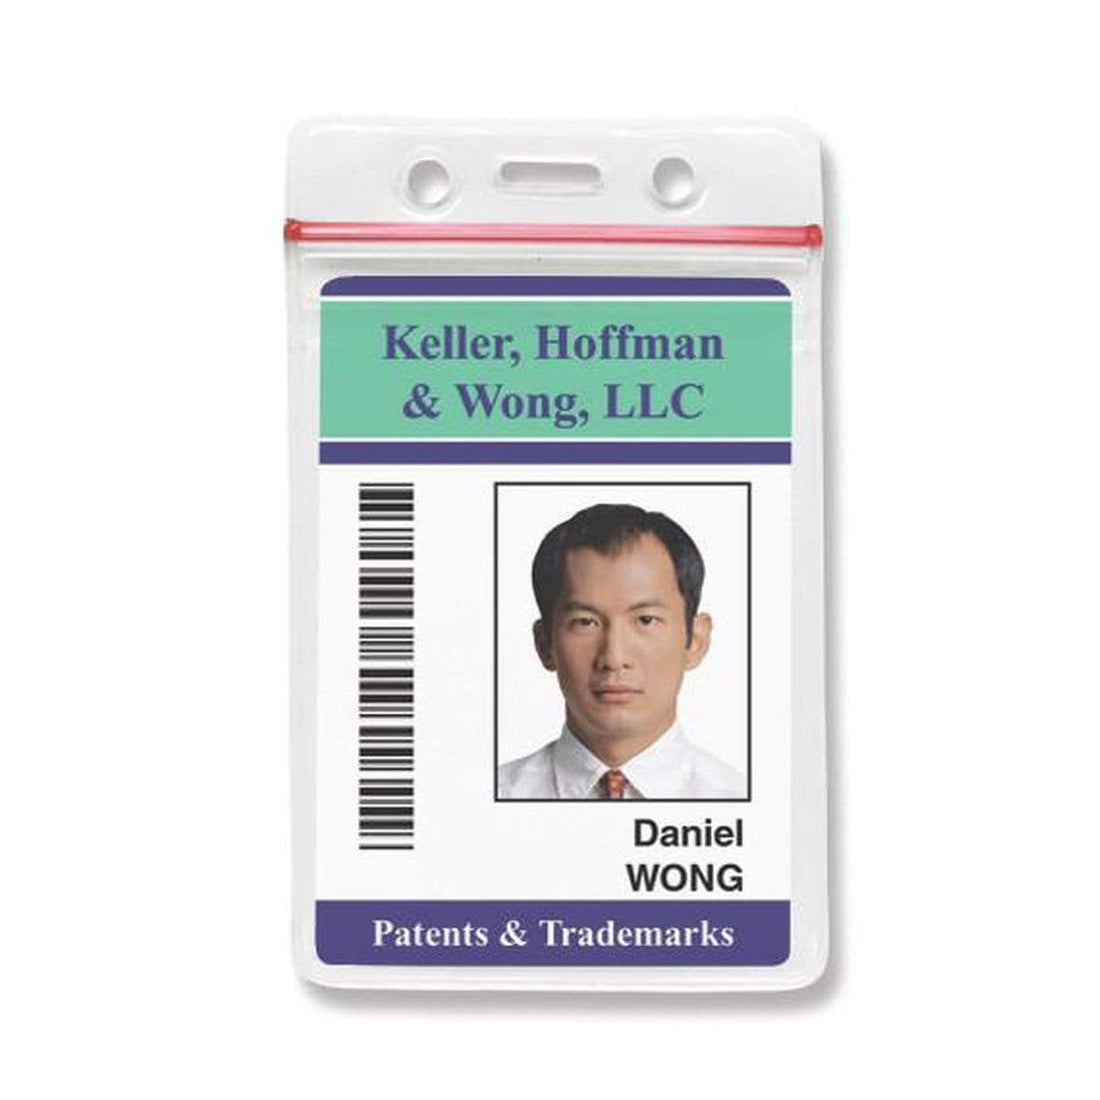 4 Corporate ID Cards and Company ID Essentials